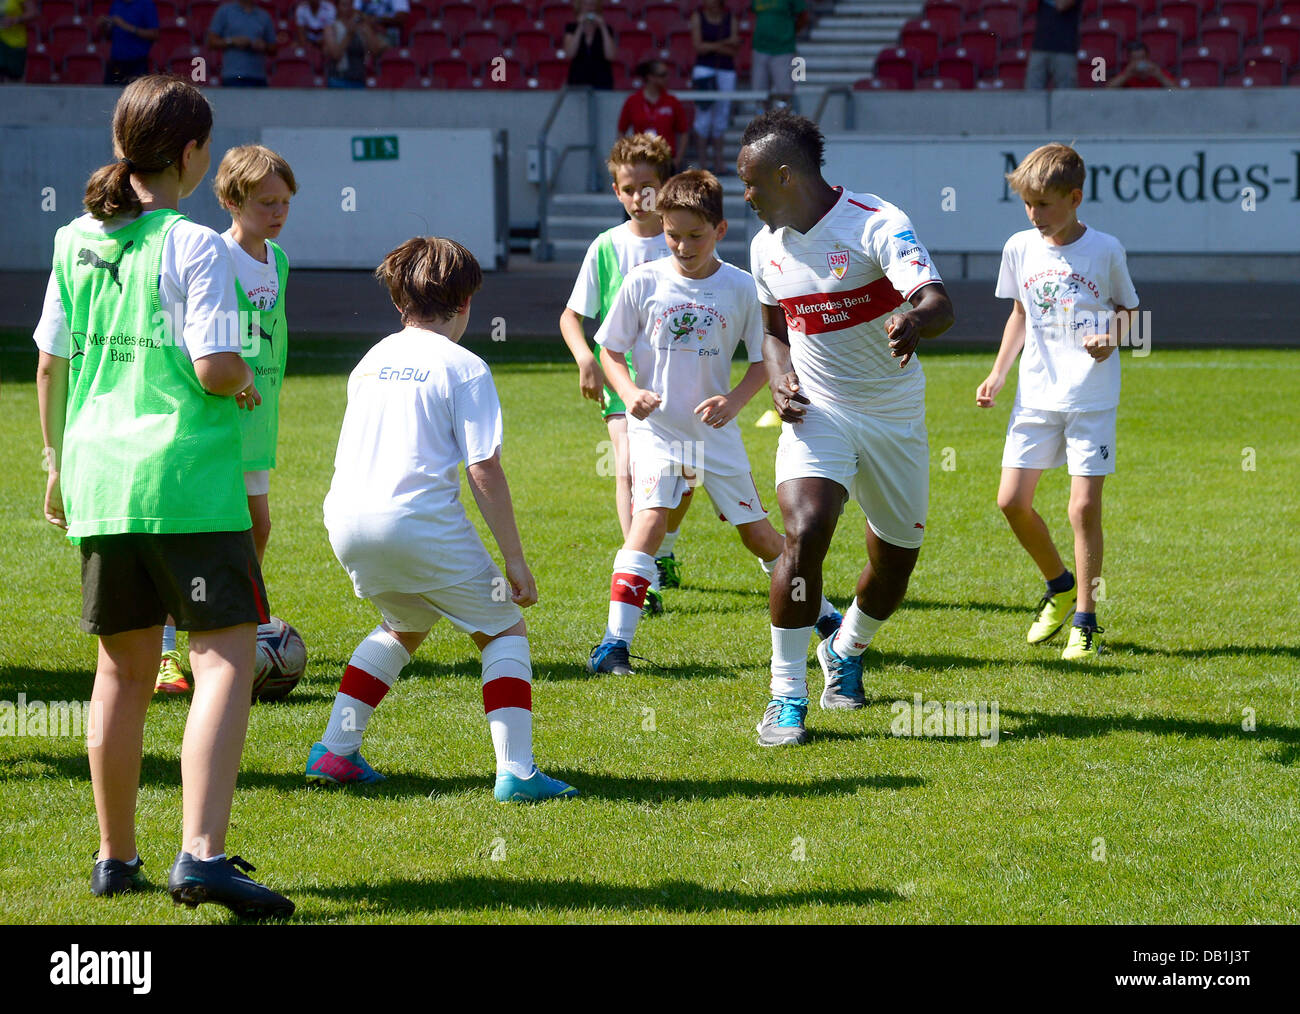 Stuttgart, Germany. 21st July, 2013. Stuttgart's Arthur Boka (2-R) practices with young soccer players at the beginning of the new Bundesliga soccer season 2013/14 at Mercedes-Benz-Arena in Stuttgart, Germany, 21 July 2013. Photo: Daniel Maurer/dpa/Alamy Live News Stock Photo